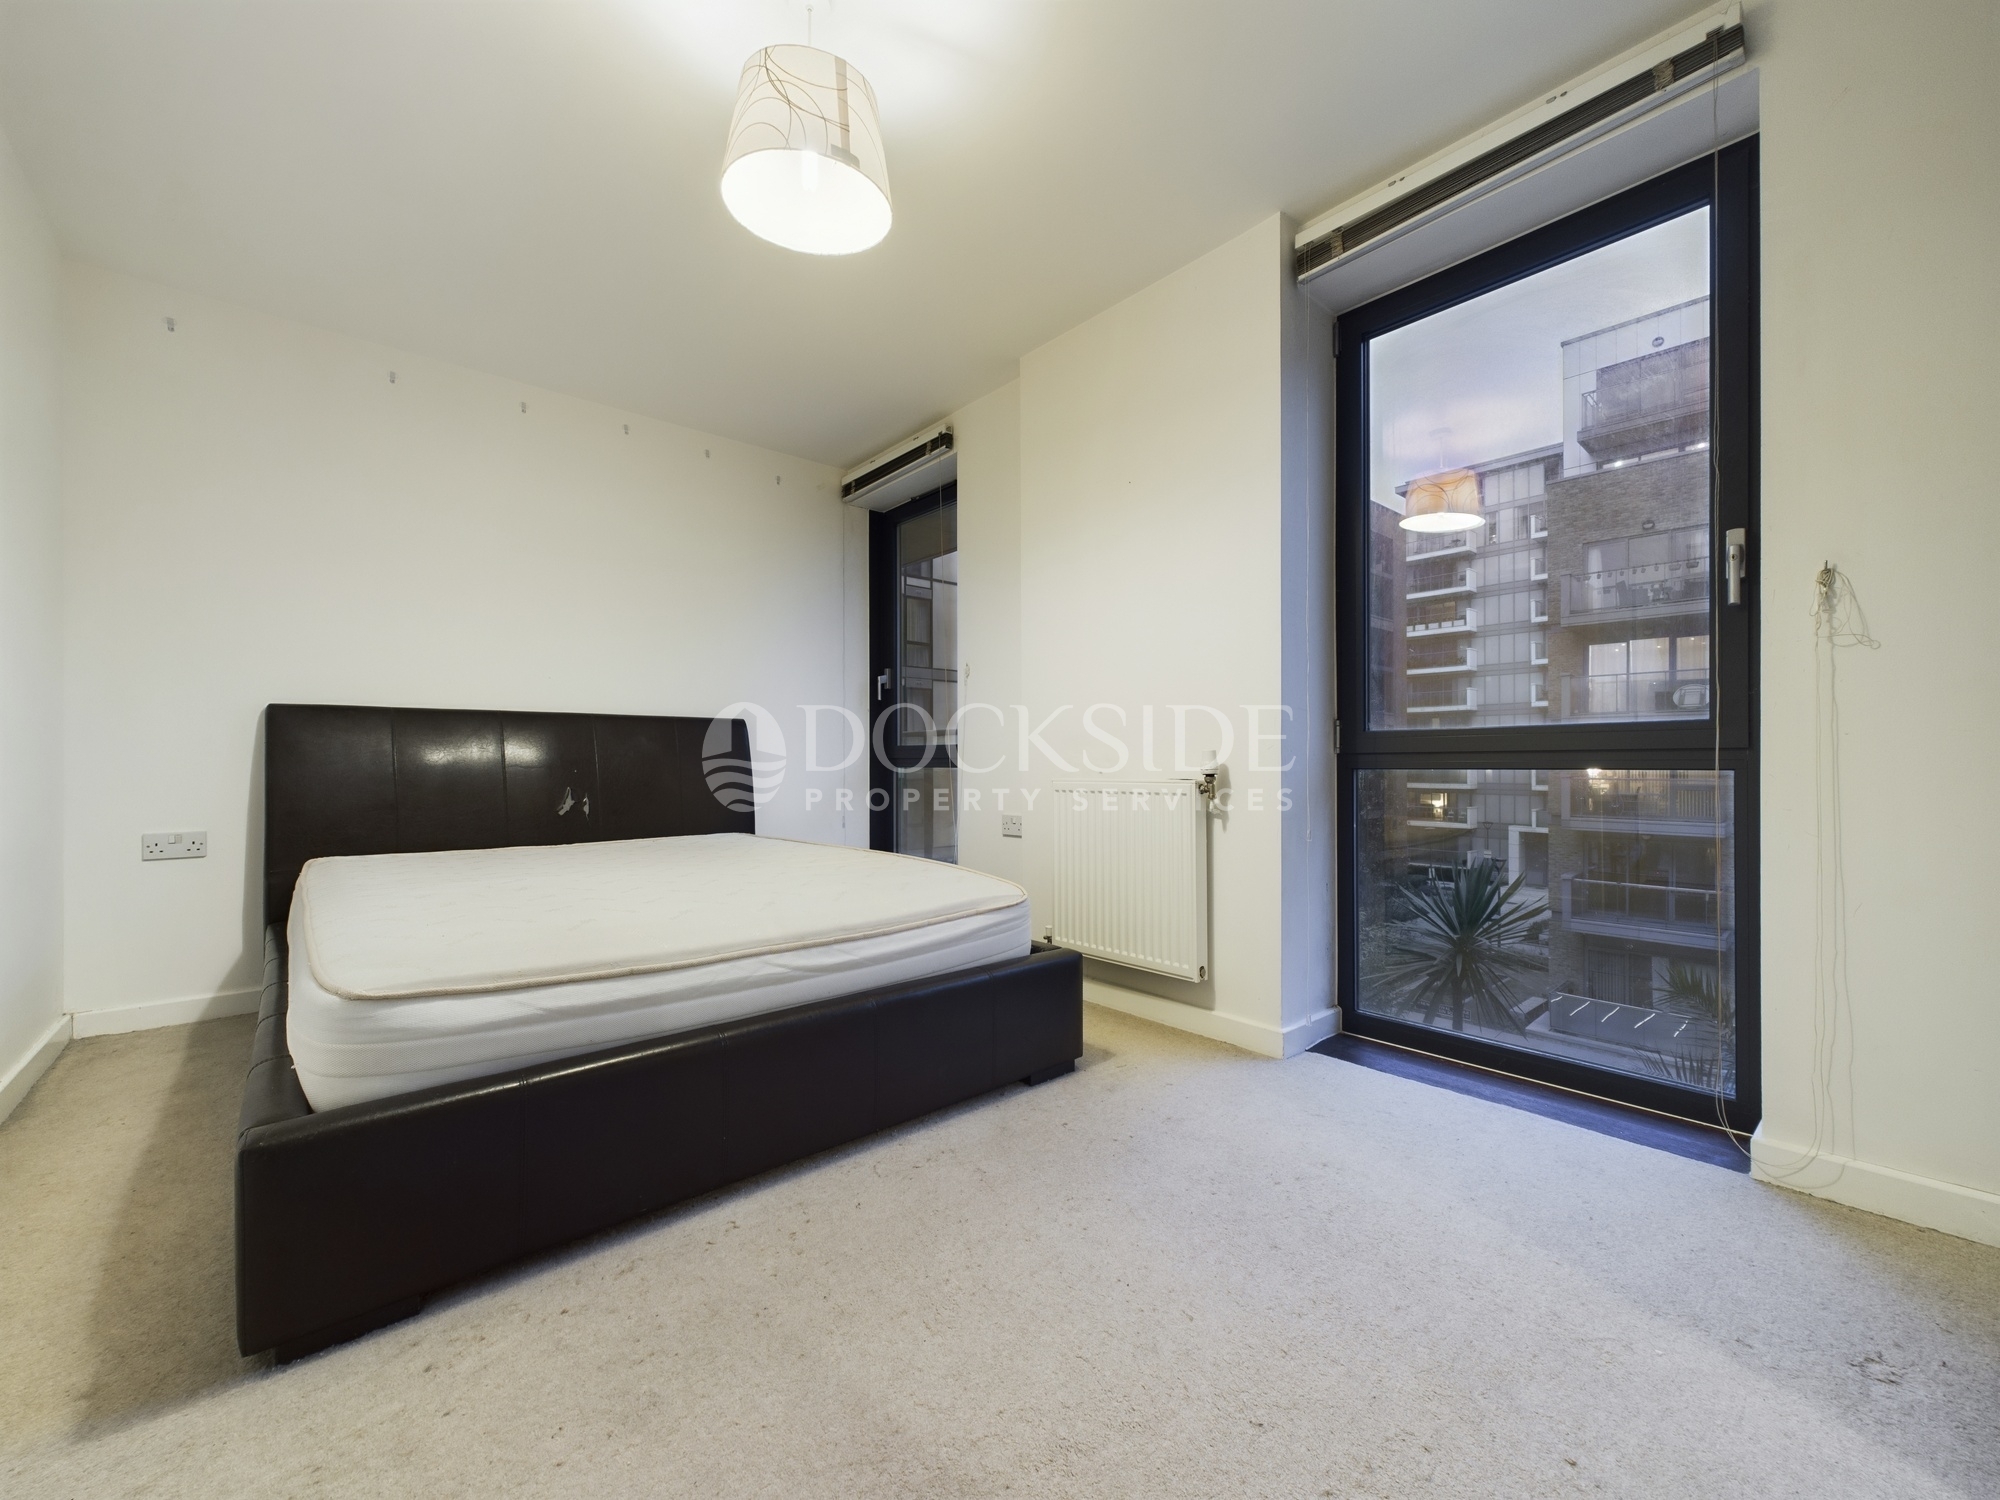 1 bed to rent in Casson Apartments, London 9